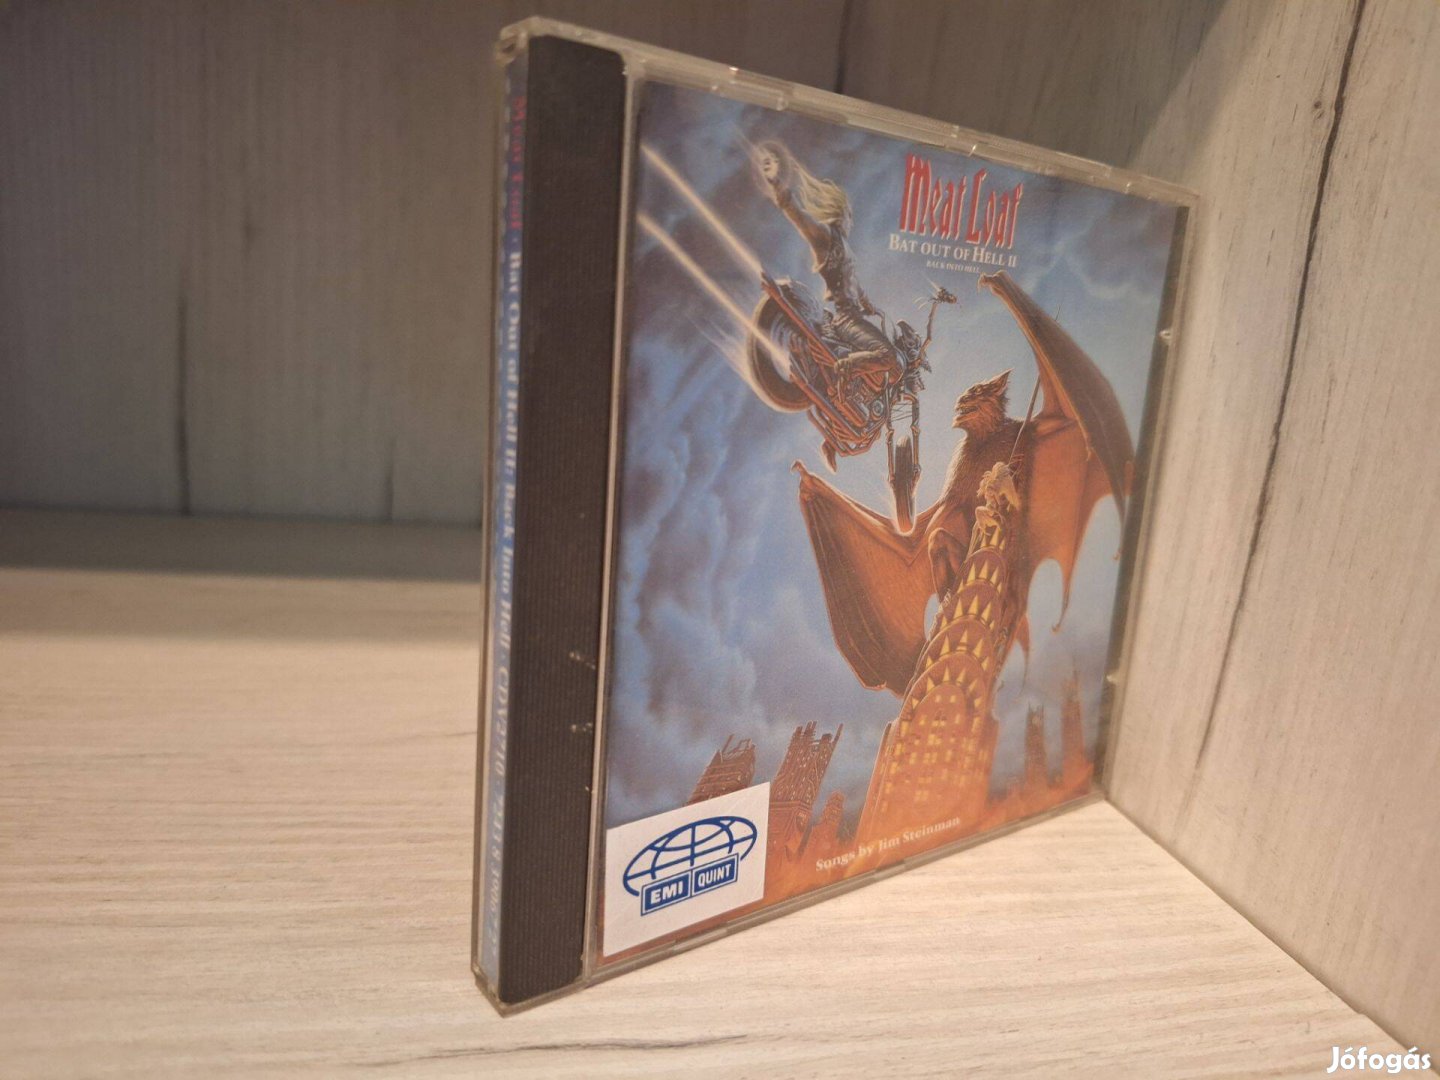 Meat Loaf - Bat Out Of Hell II: Back Into Hell CD